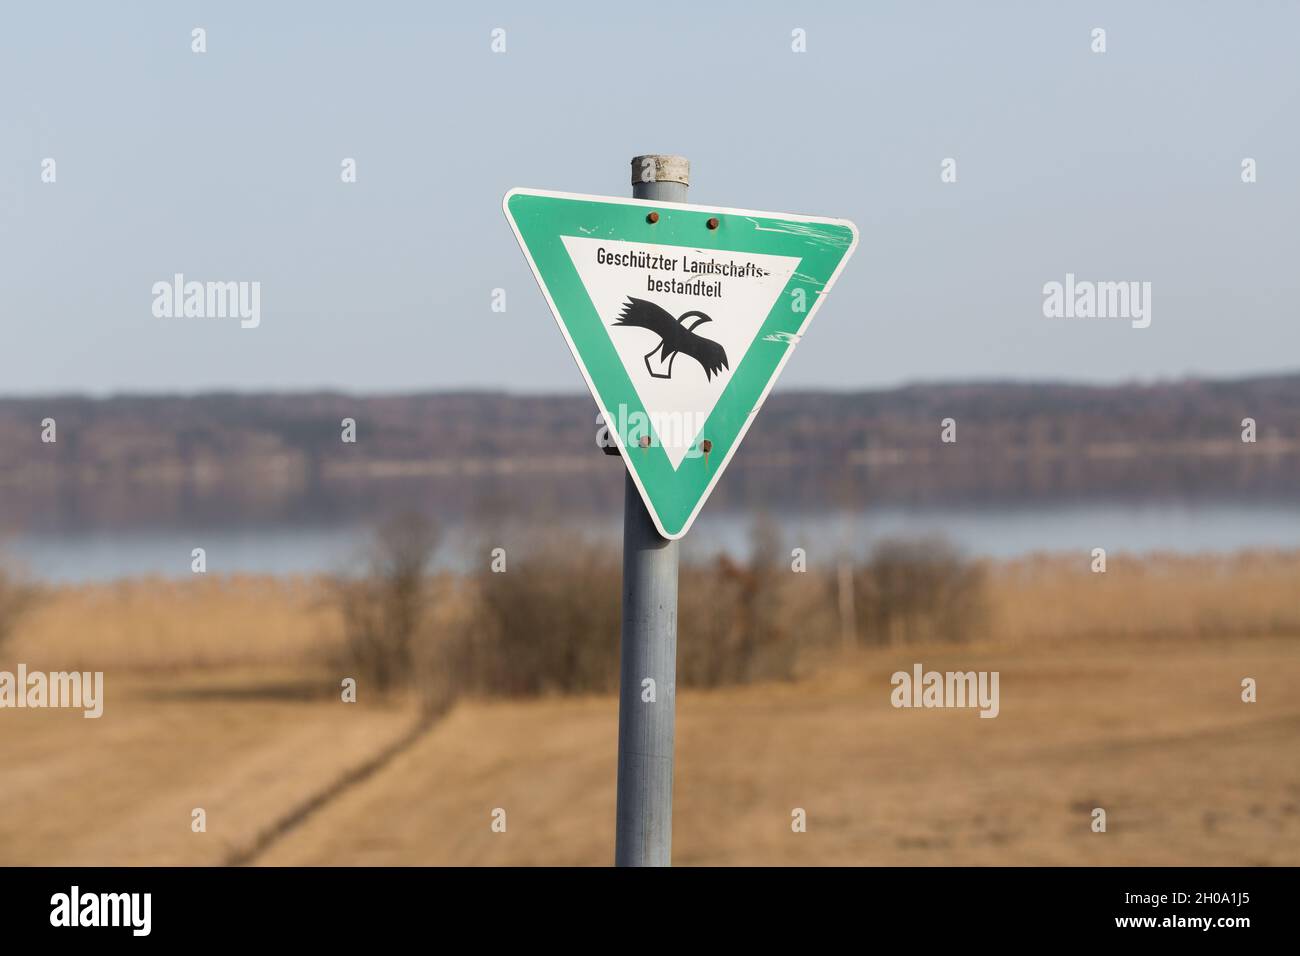 Seeseiten, Germany - Feb 23, 2021: Sign reading 'Geschützter Landschaftsbestandteil'. Indicating a nature reserve for protected wildlife. Stock Photo